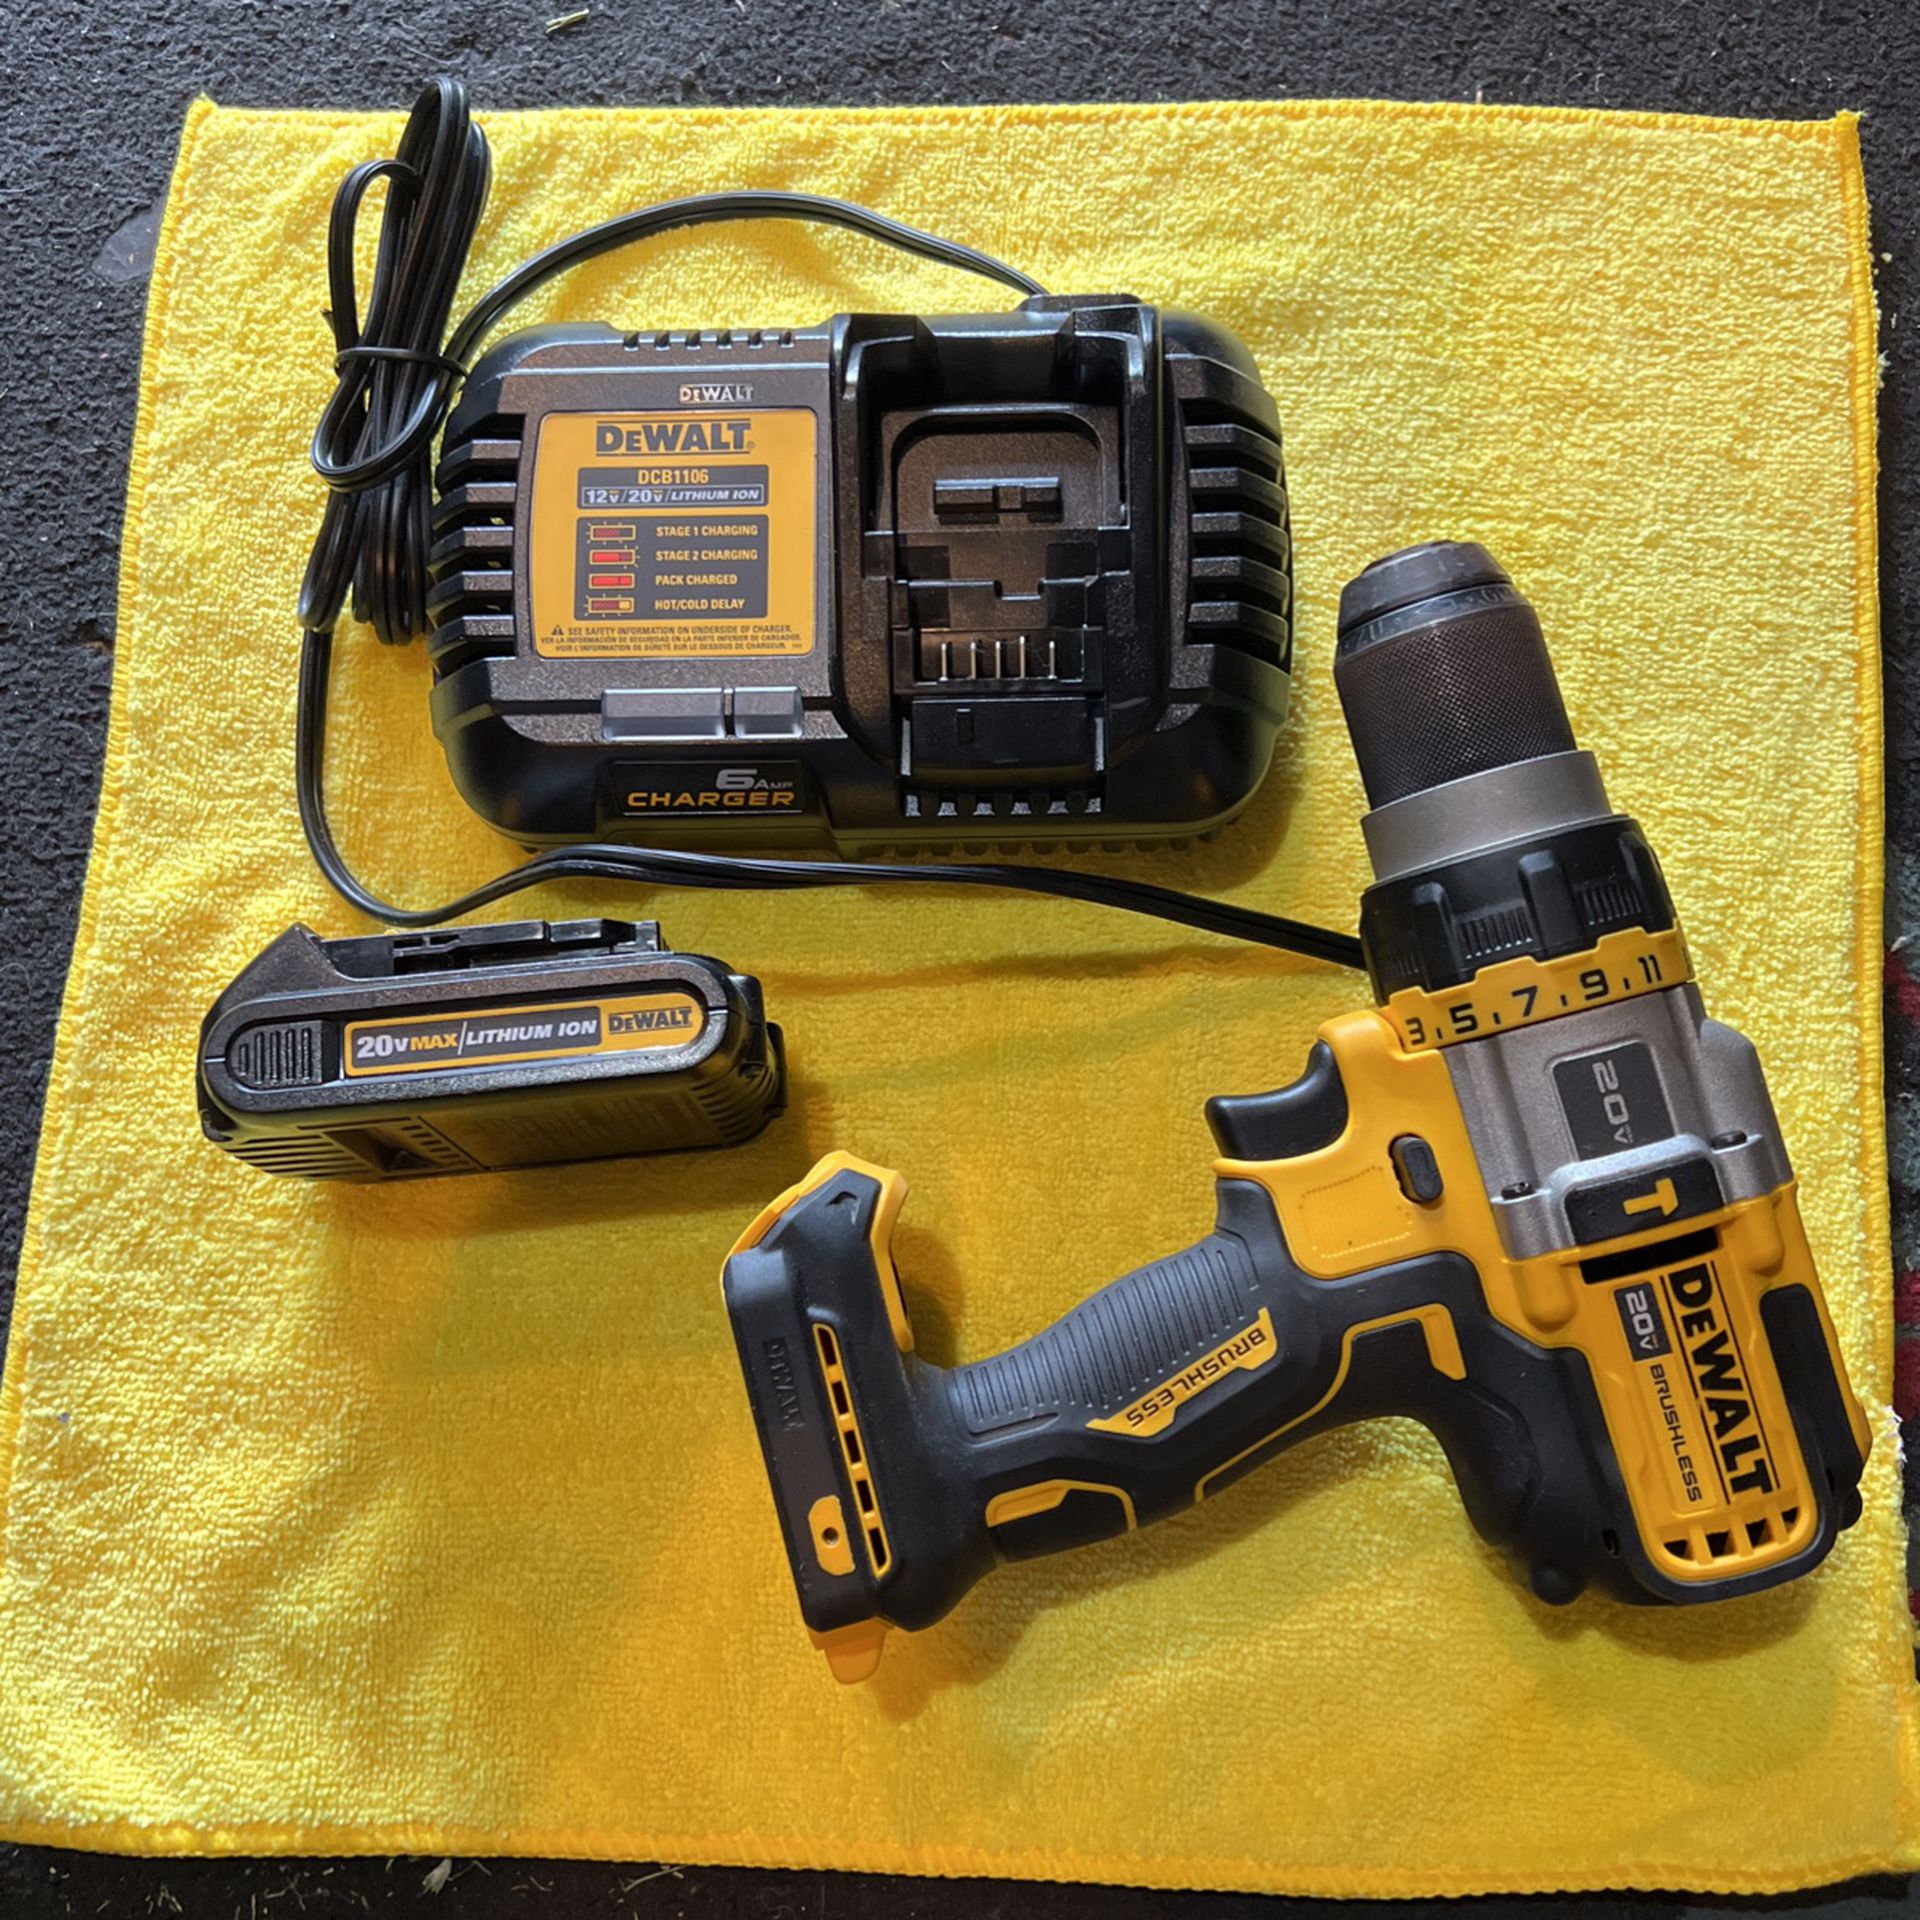 DeWALT DCD771C2 20V MAX Lithium-Ion 1/2" Compact Drill/Driver Kit for in Long Beach, CA - OfferUp